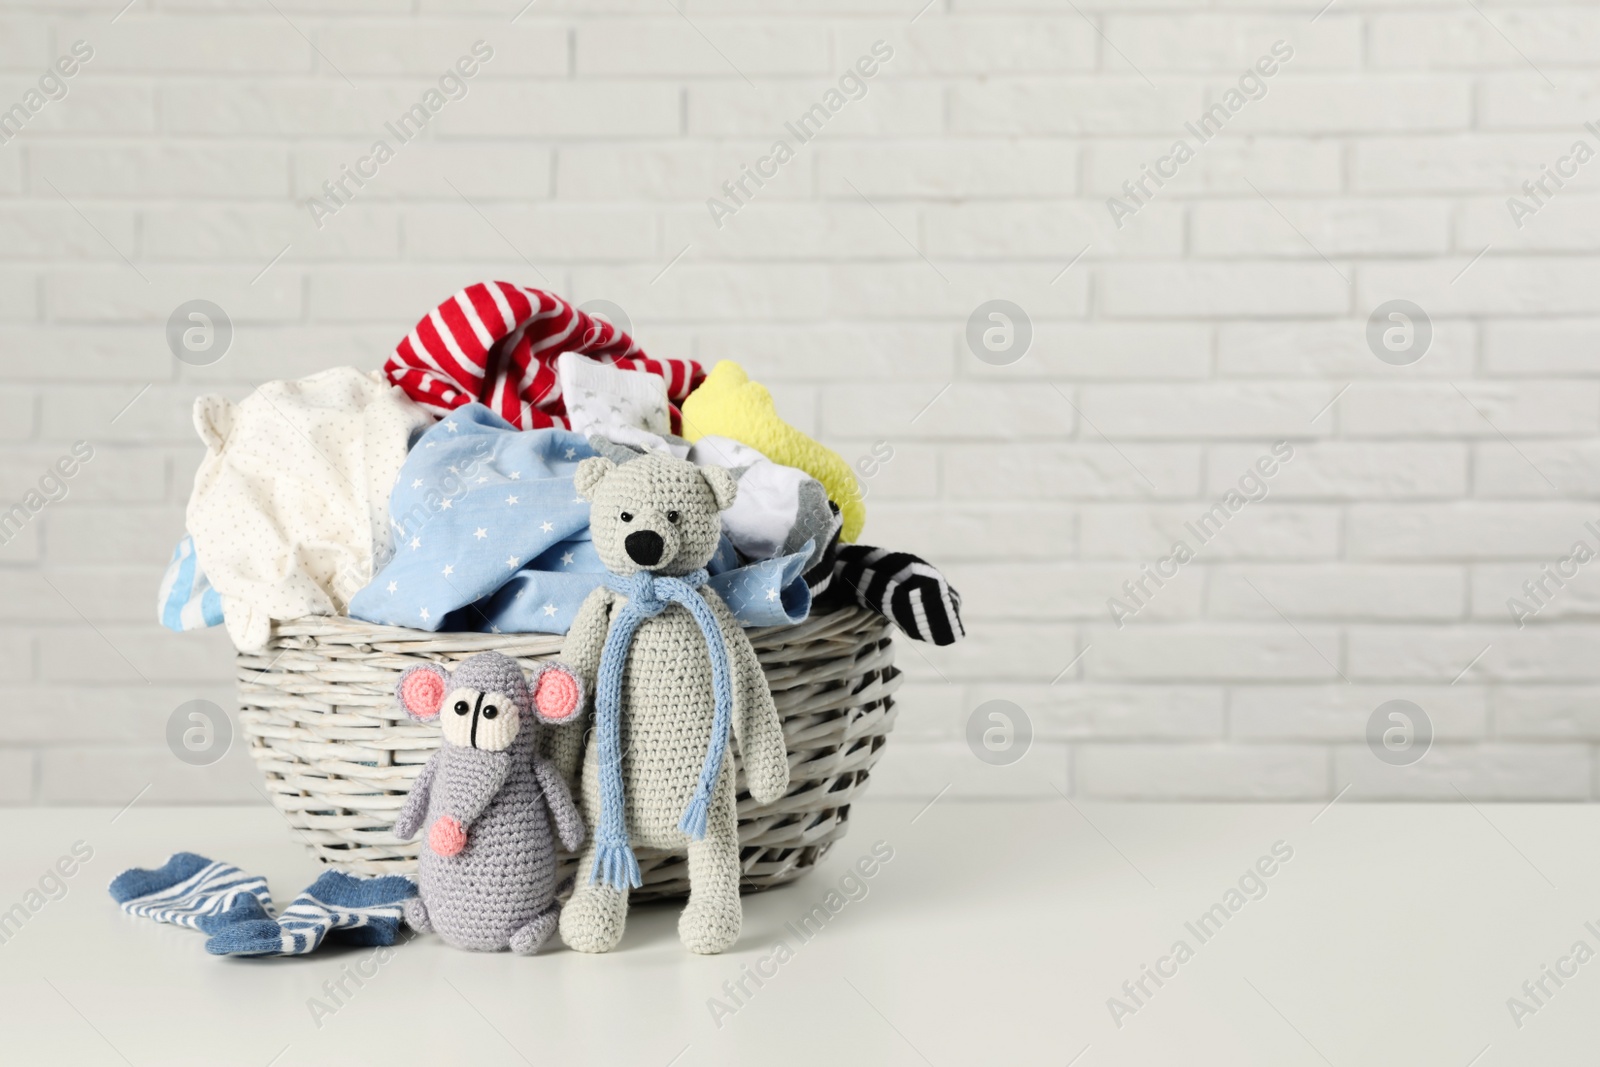 Photo of Wicker basket with laundry and toys on table near white brick wall. Space for text